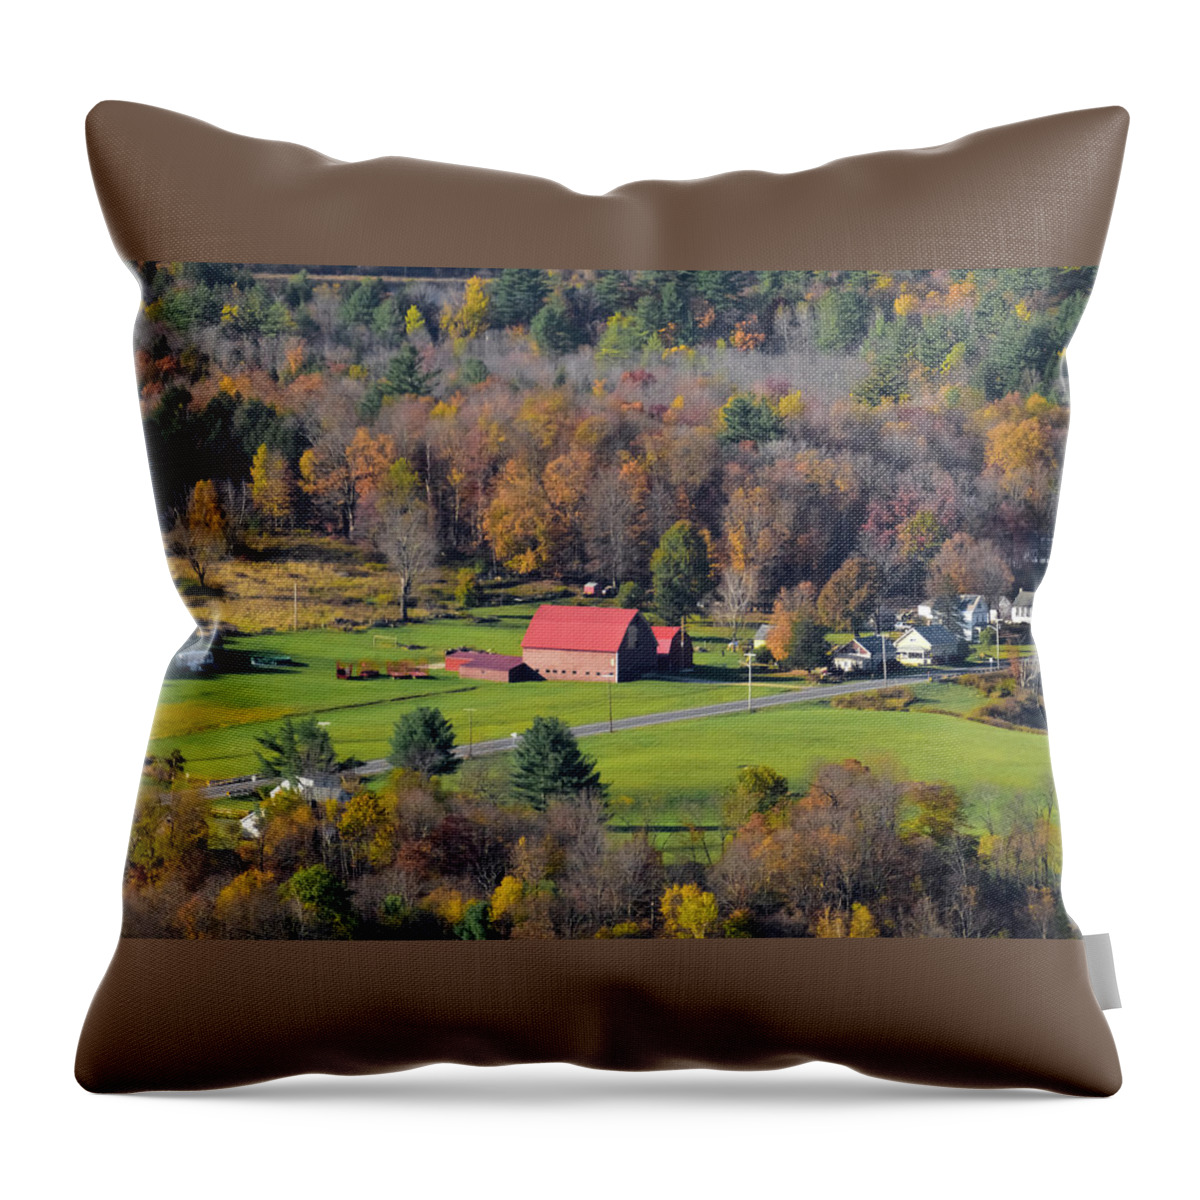 The Red Roof Throw Pillow featuring the photograph The Red Roof by Christina McGoran